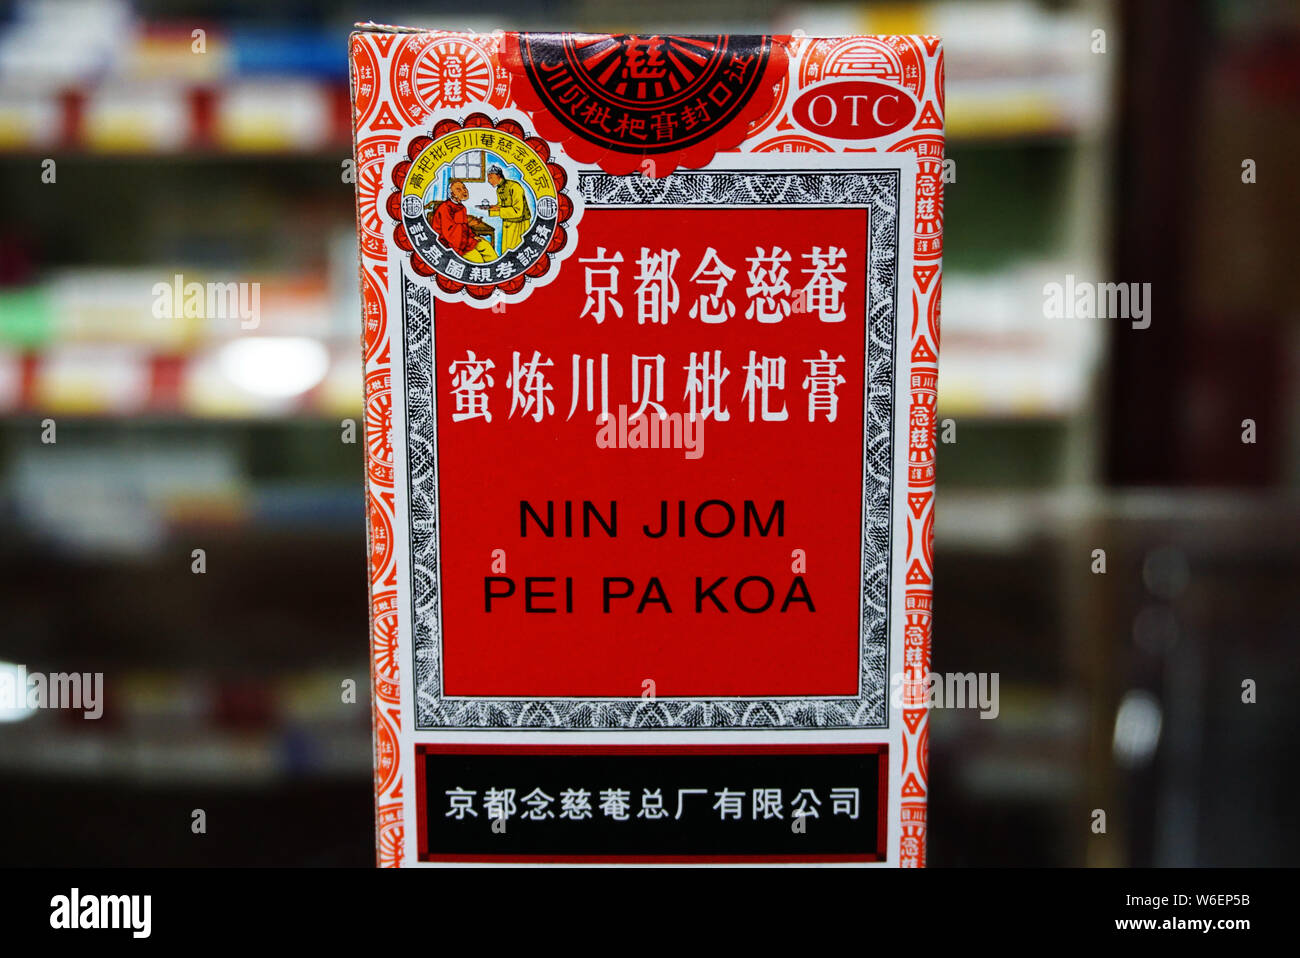 A bottle of Chinese traditional cough syrup, Nin Jiom Pei Pa Koa, is for  sale at a pharmacy in Hangzhou city, east China's Zhejiang province, 27  Febru Stock Photo - Alamy